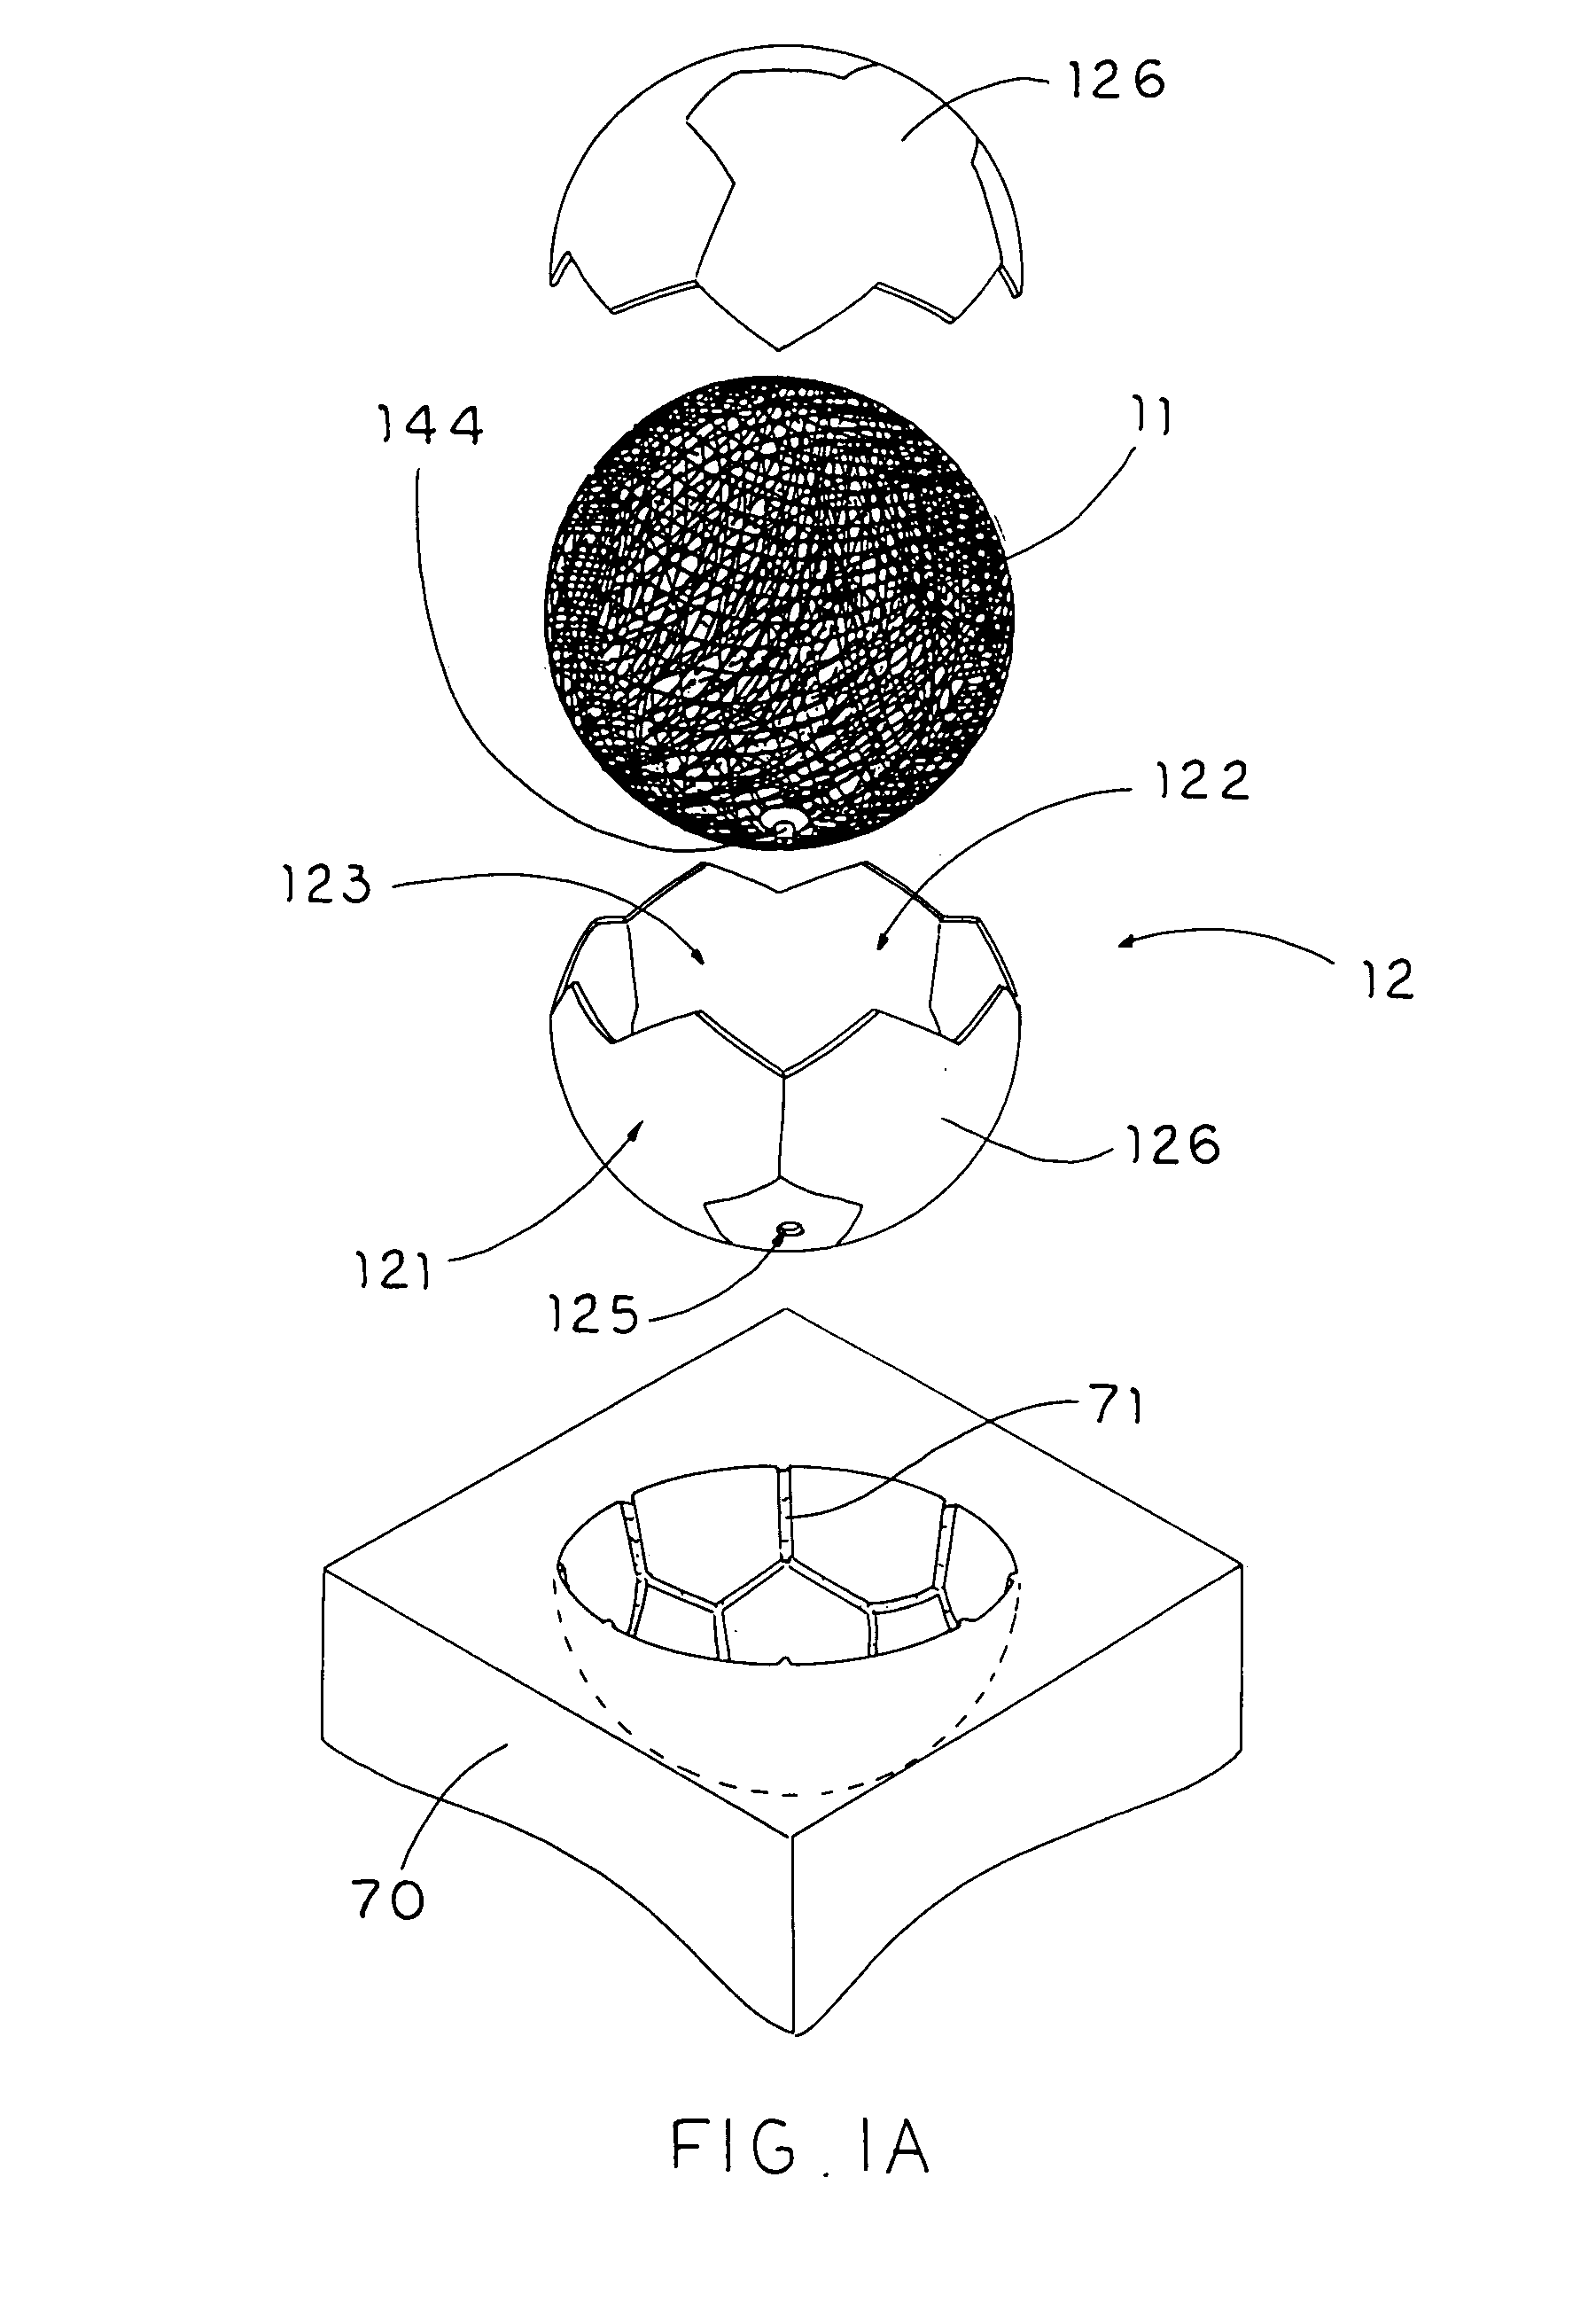 Sportsball with integral ball casing and bladder body